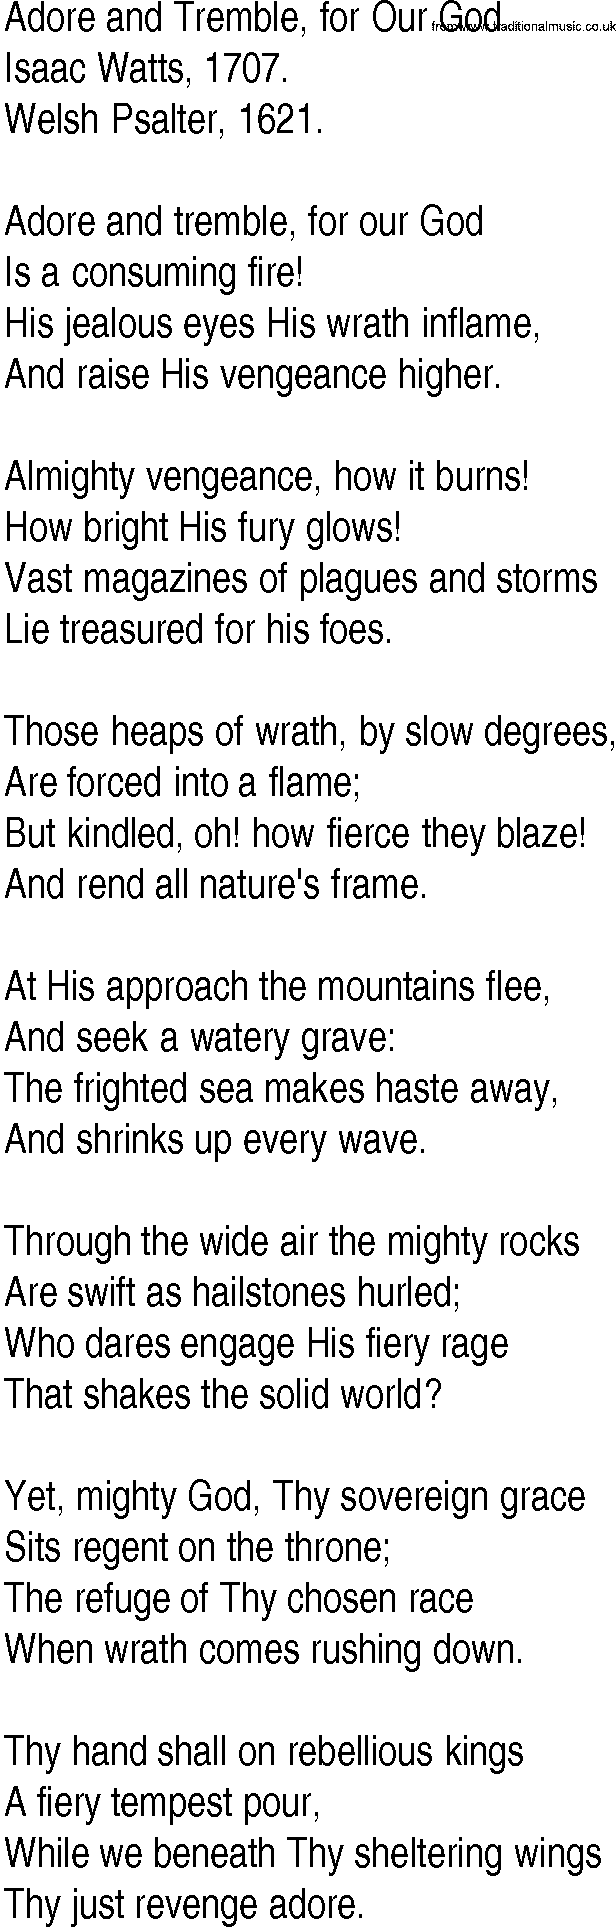 Hymn and Gospel Song: Adore and Tremble, for Our God by Isaac Watts lyrics